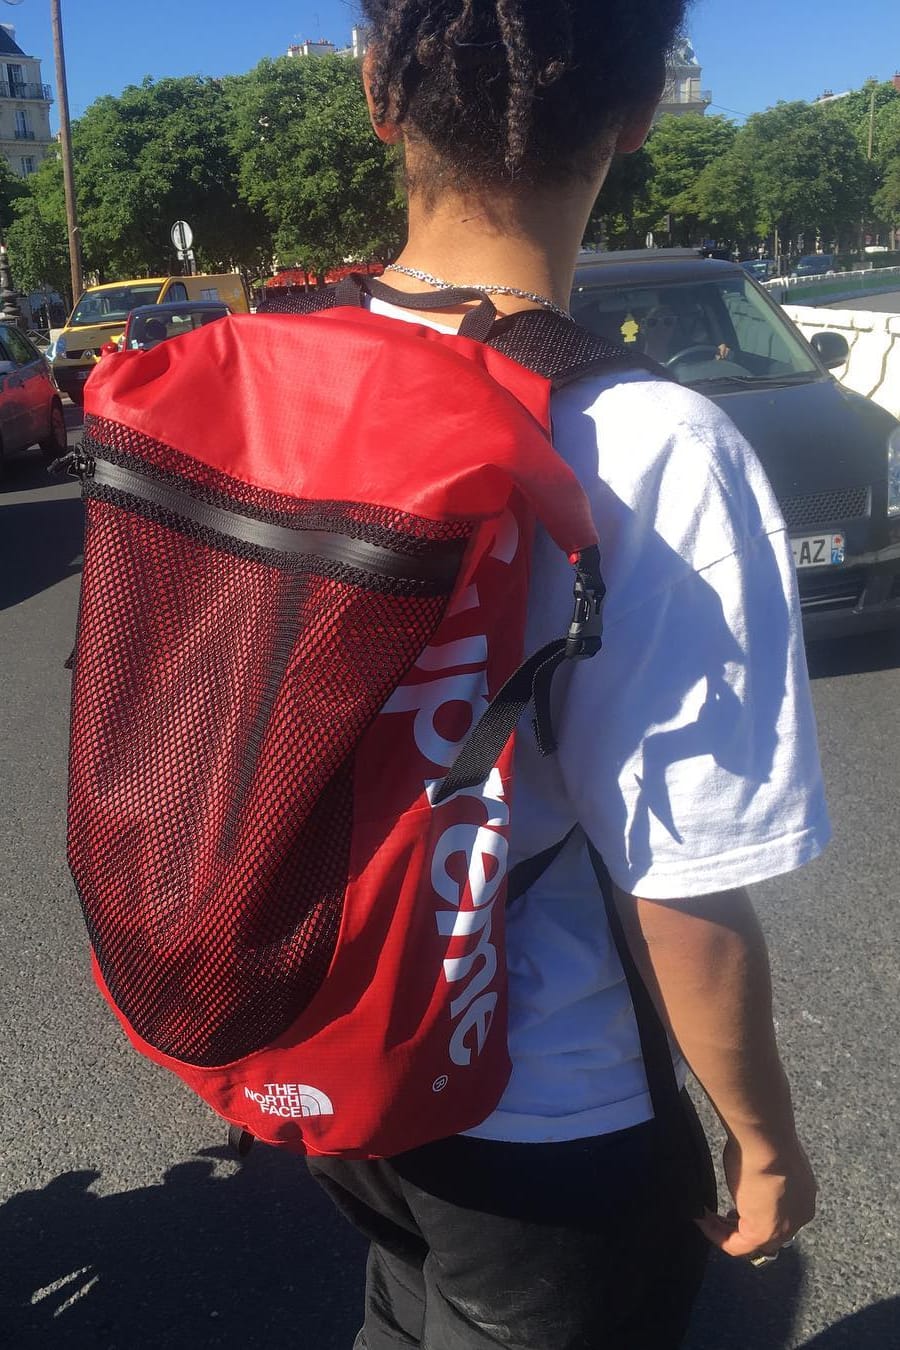 the north face waterproof backpack supreme